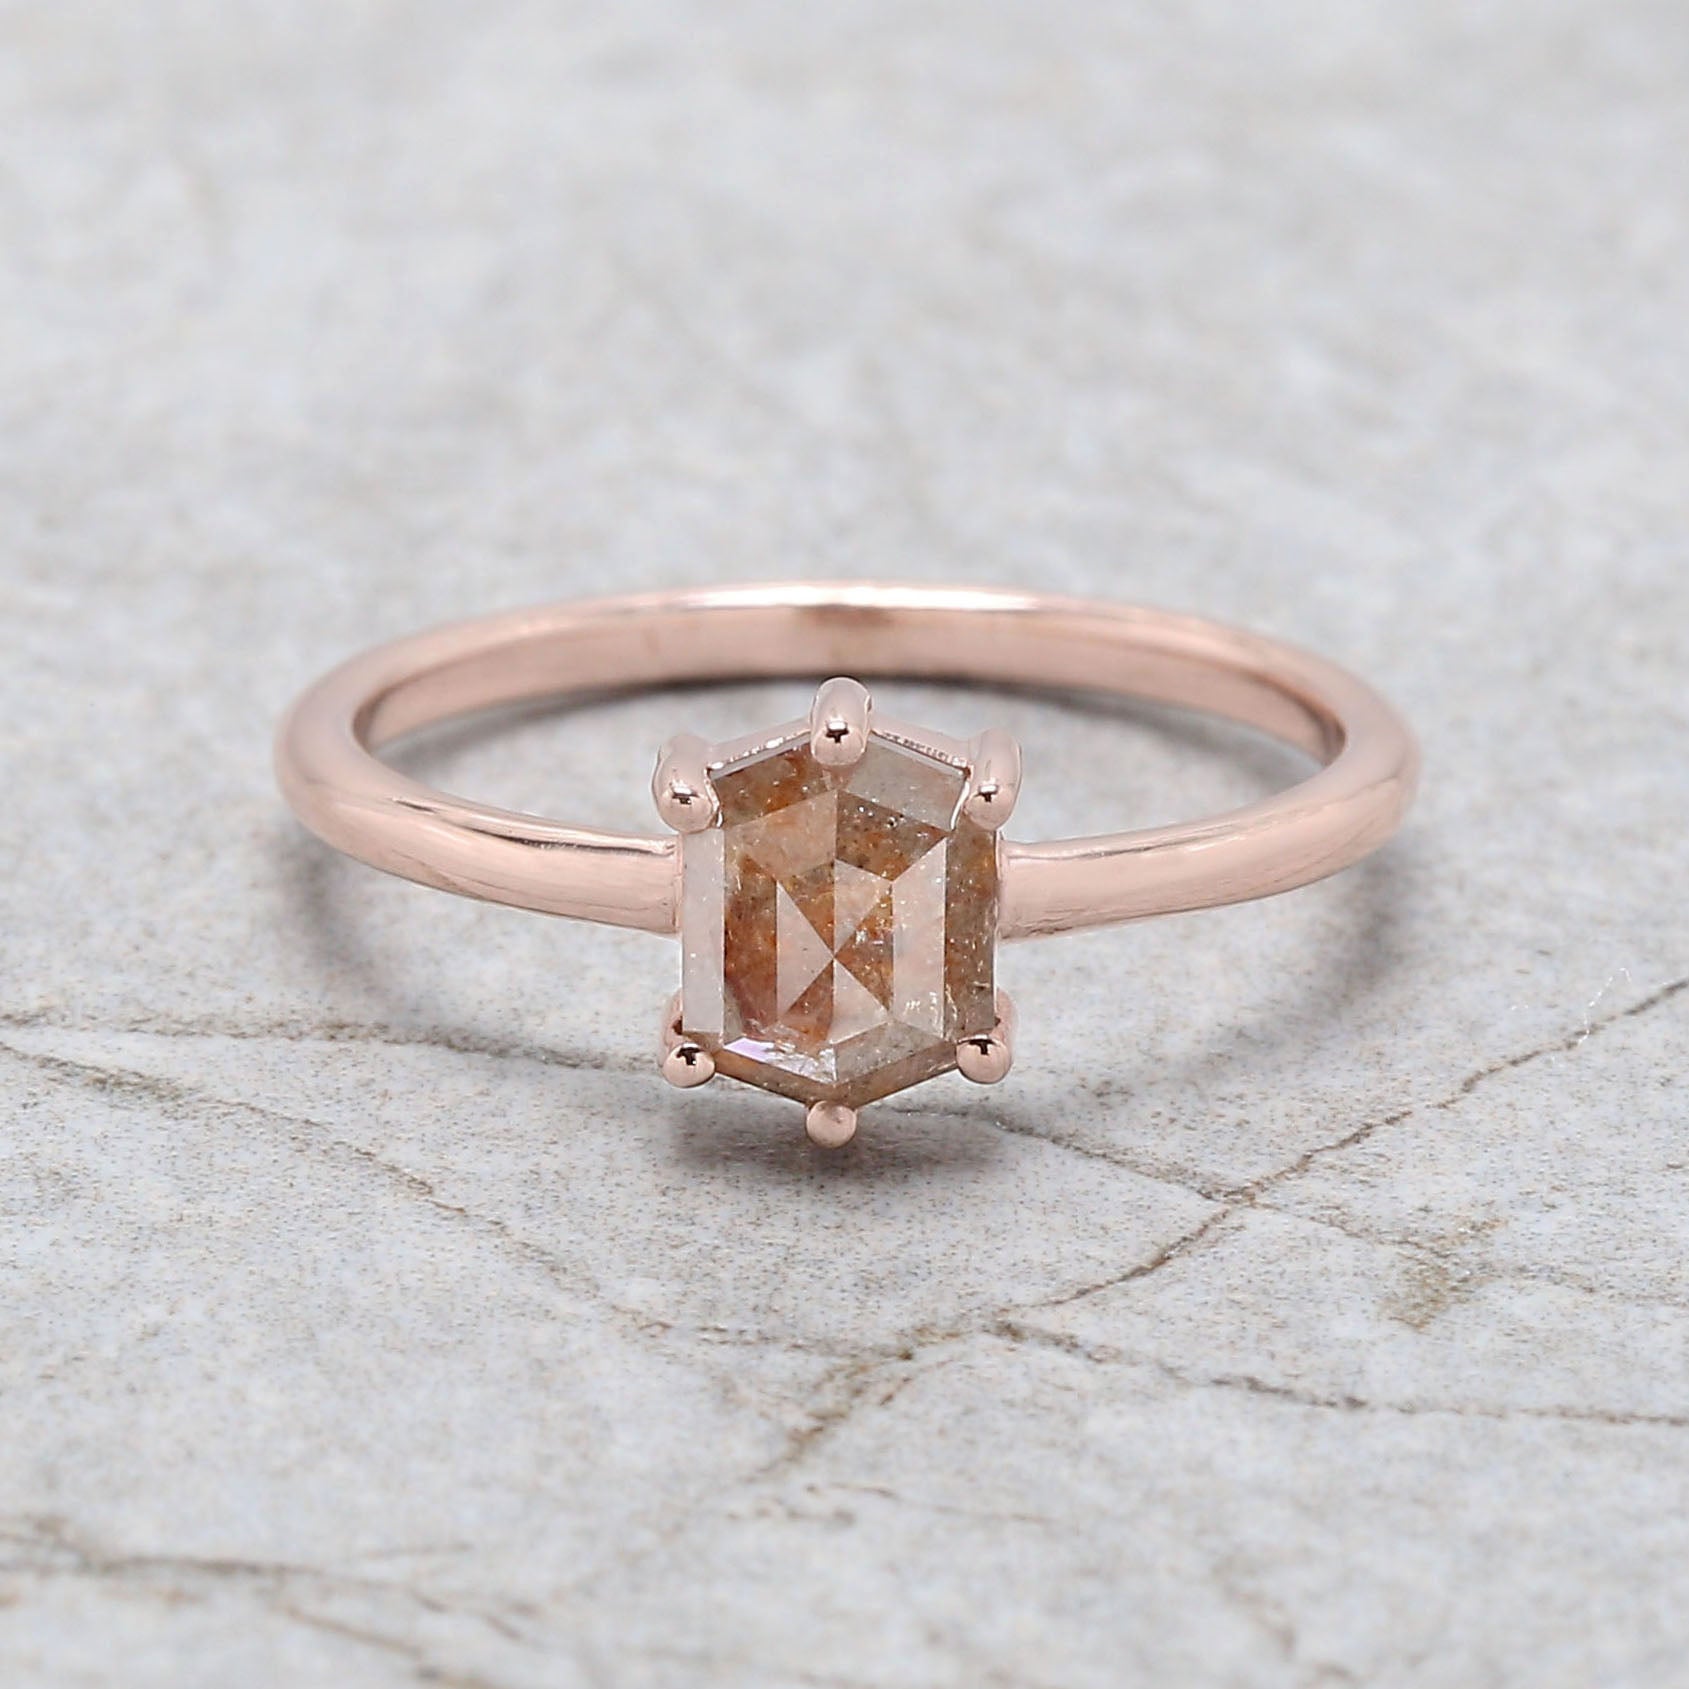 Hexagon Brown Color Diamond Ring 1.16 Ct 6.54 MM Hexagon Shape Diamond Ring 14K Solid Rose Gold Silver Engagement Ring Gift For Her QN2181